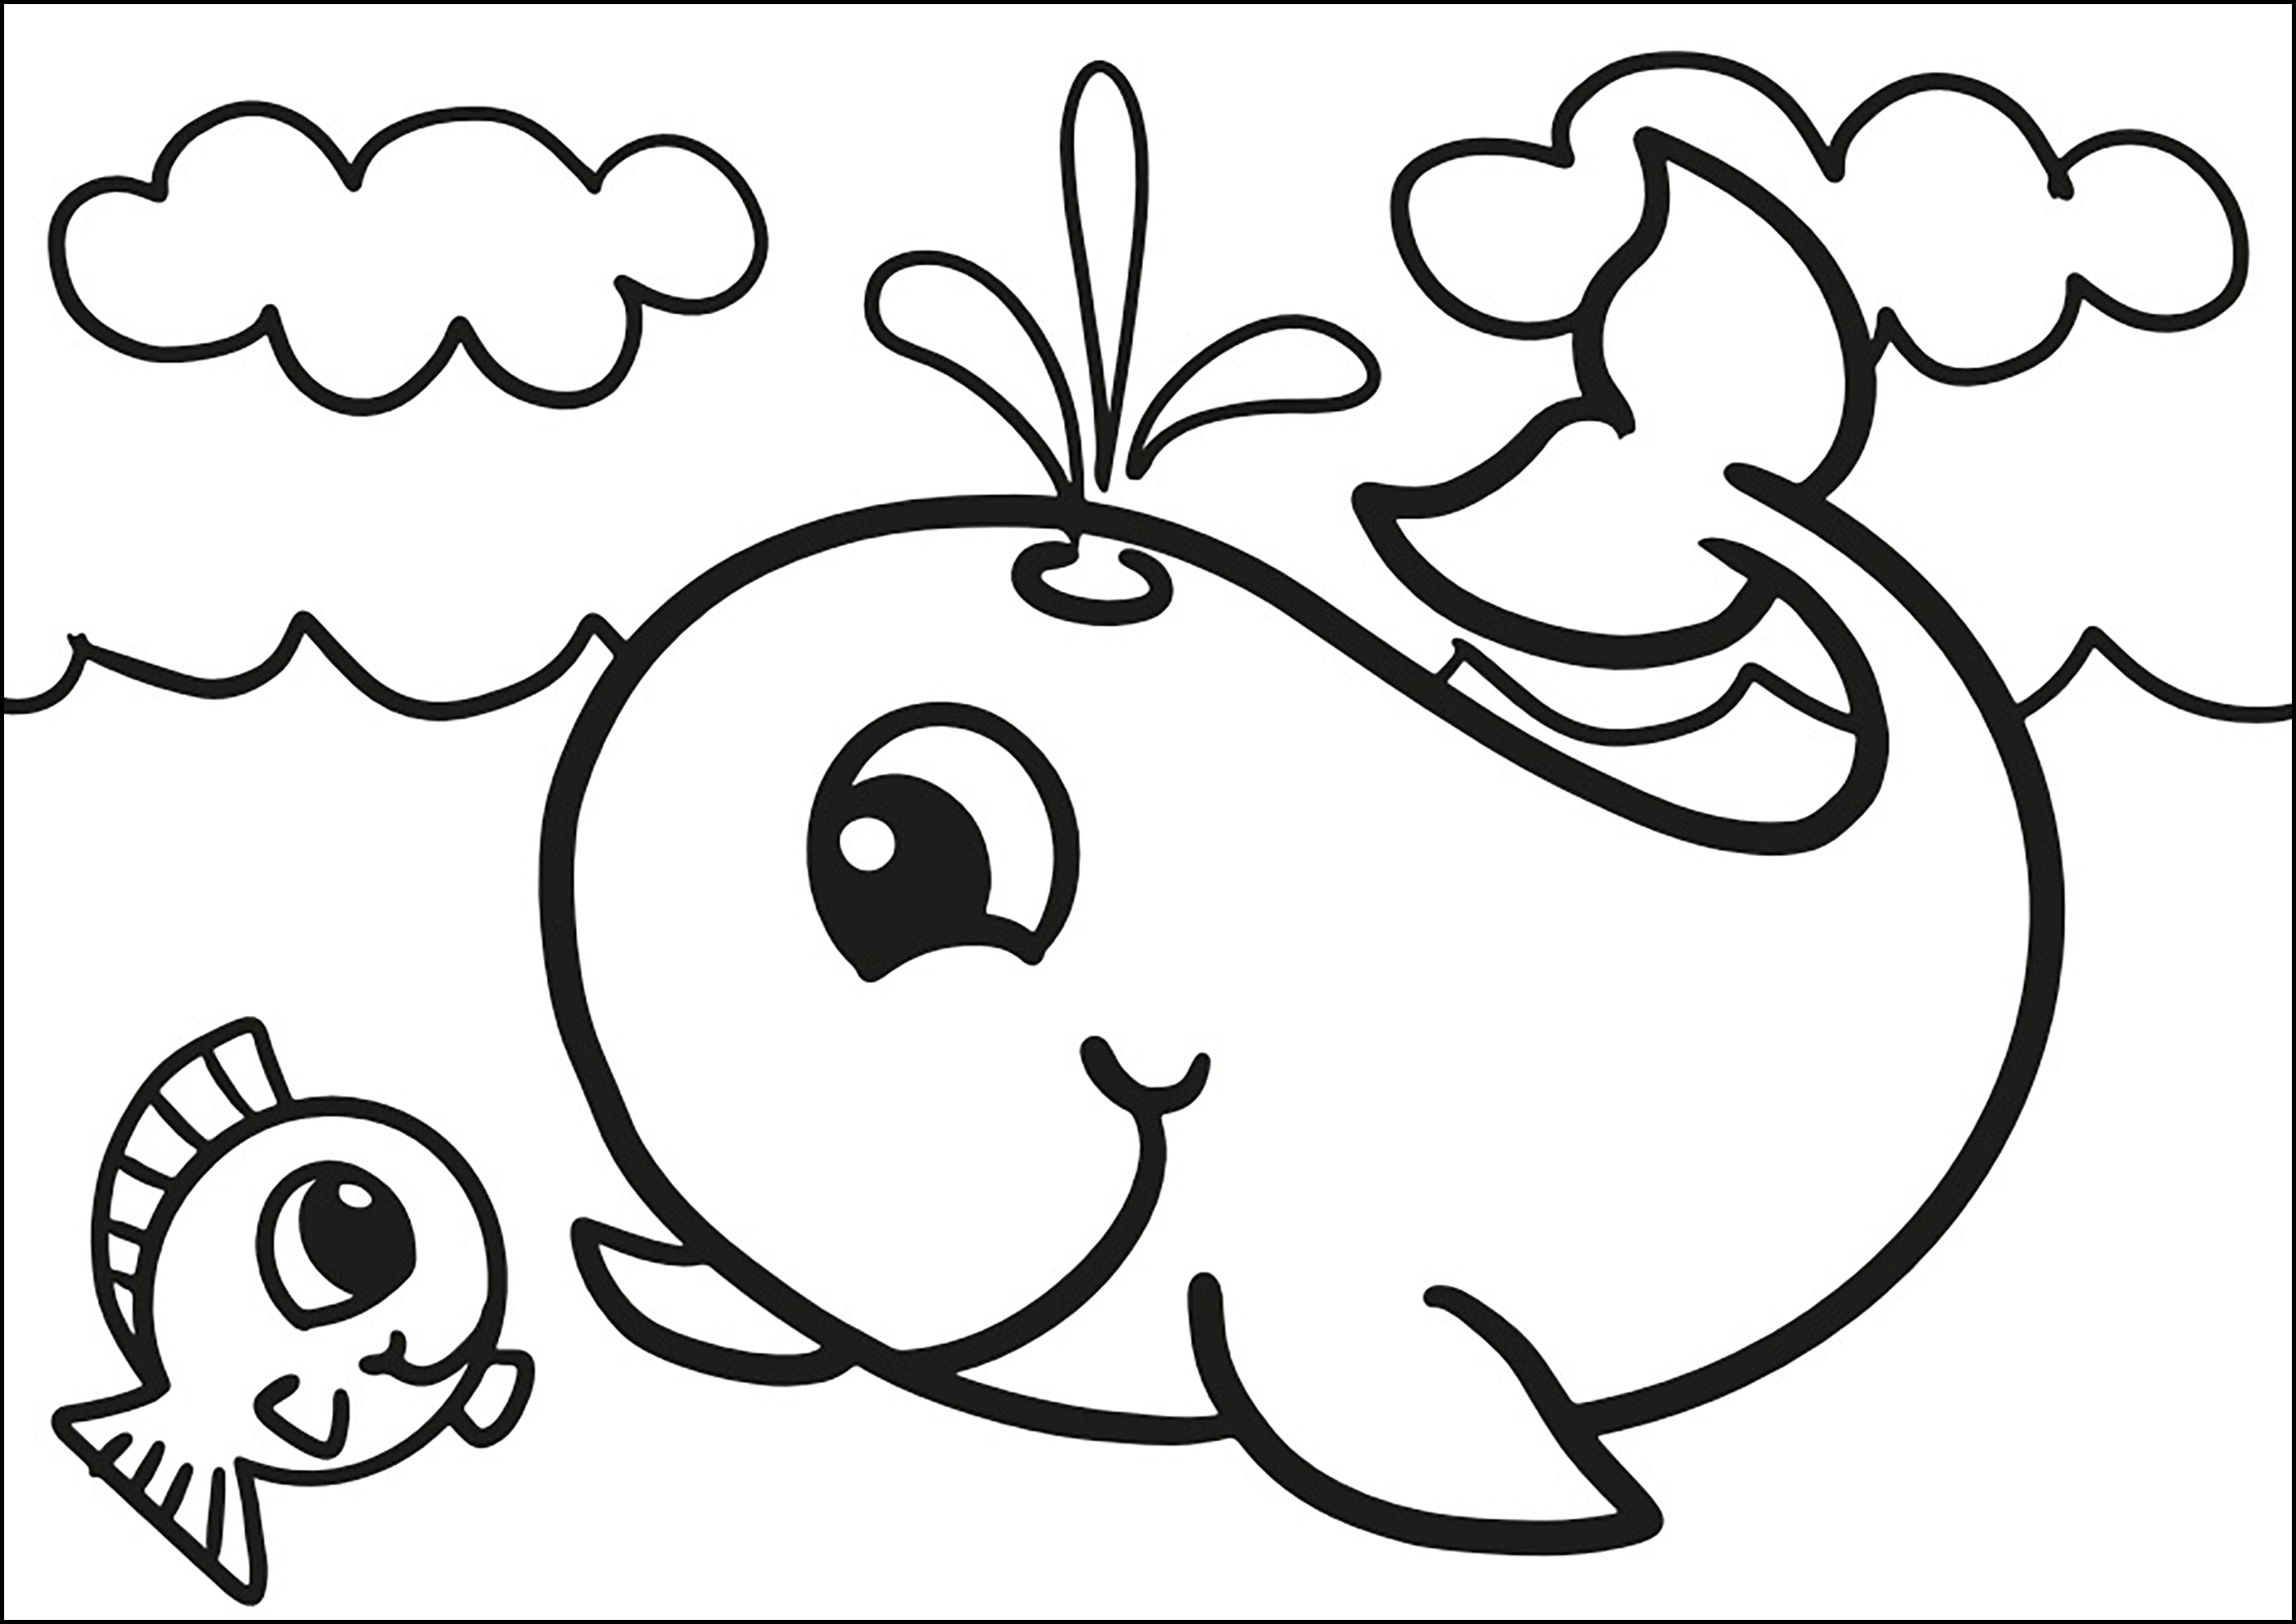 Whale and small fish. Coloring with thick lines